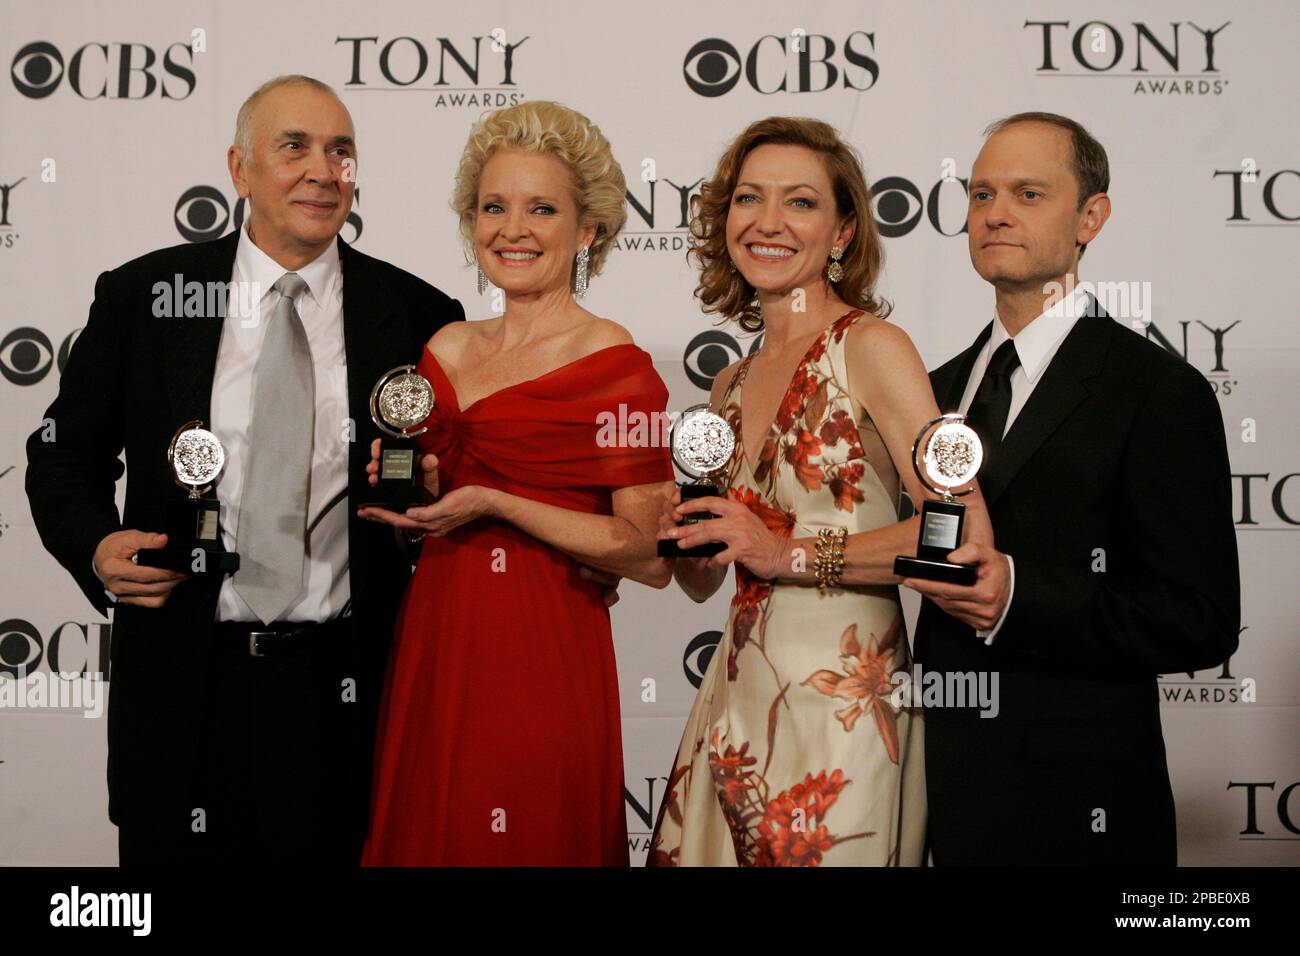 Winners of the 2007 best actor and actress Tony awards pose backstage at  the 61st Annual Tony Awards in New York, Sunday, June 10, 2007. The winners  are, from left, Frank Langella,